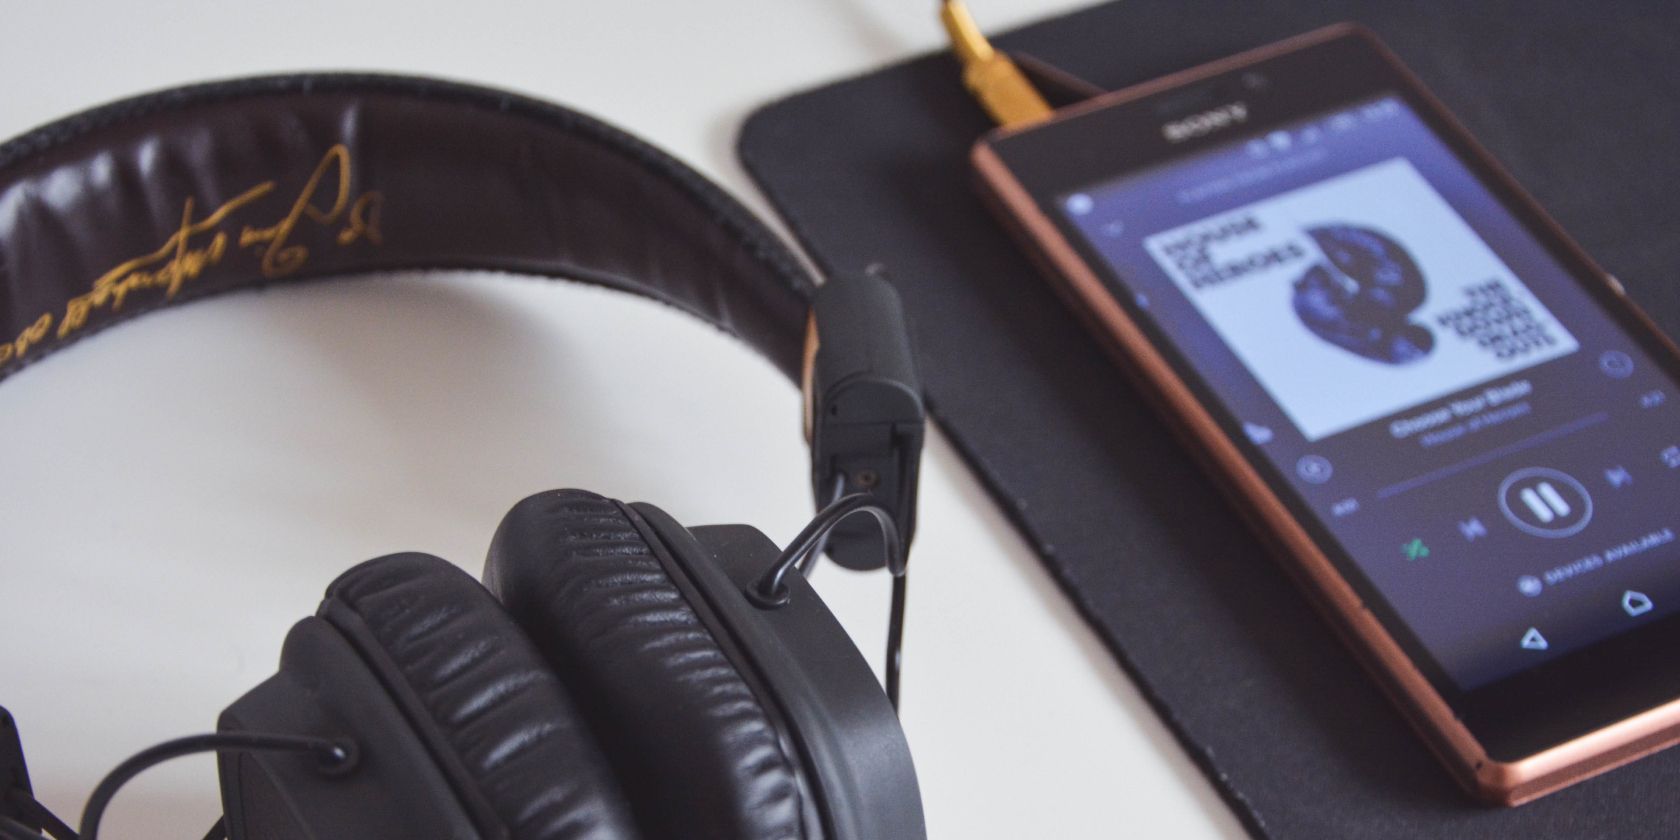 The Best Music Apps for Android, Based on Your Needs